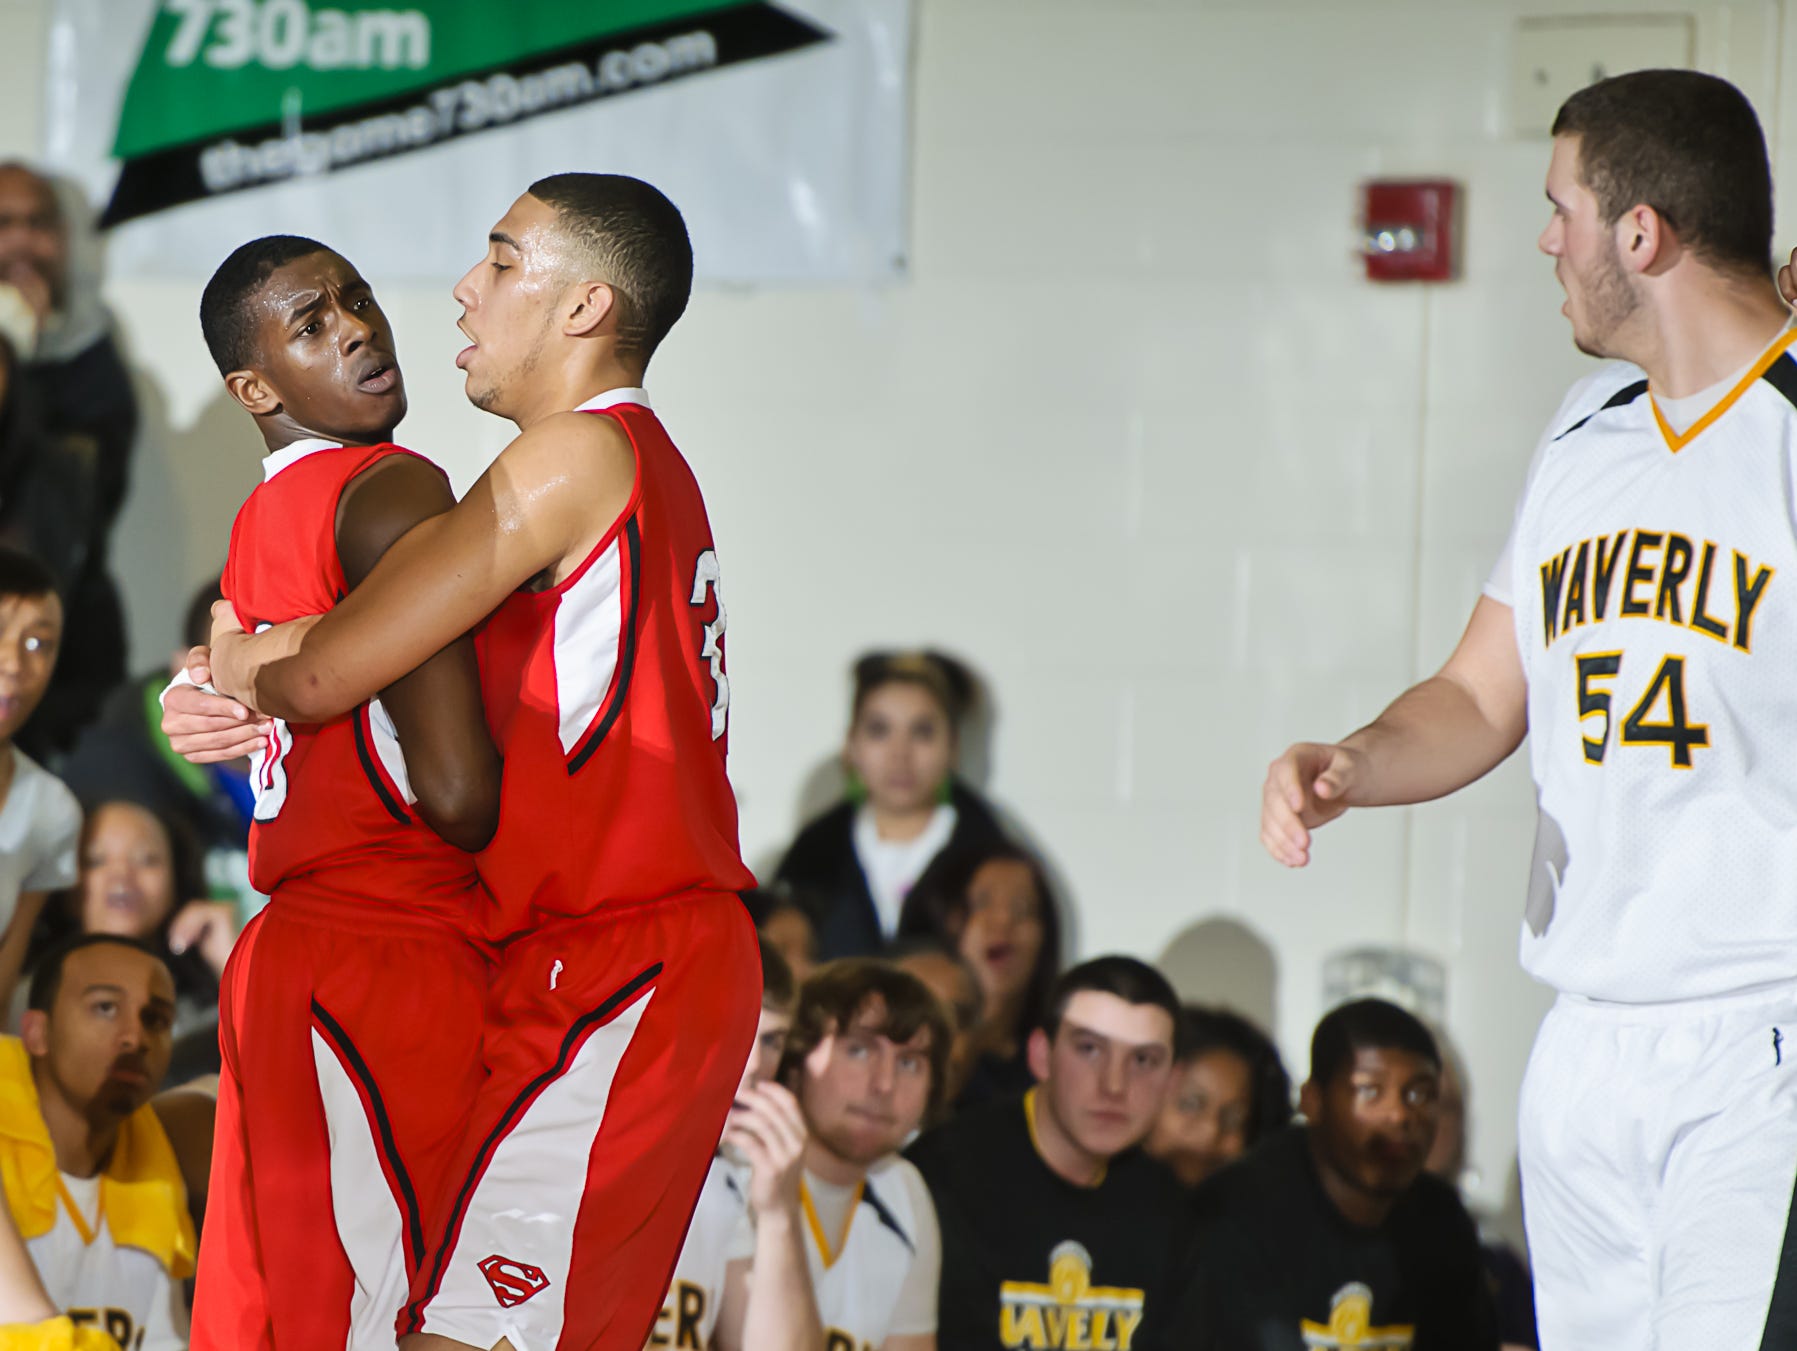 Denzel Valentine (second from left) holds back Sexton teammate teammate Donyae Logan (left) as the trash talking with Ramadan Ahmeti (right) of Waverly becomes intense during a game in 2011.